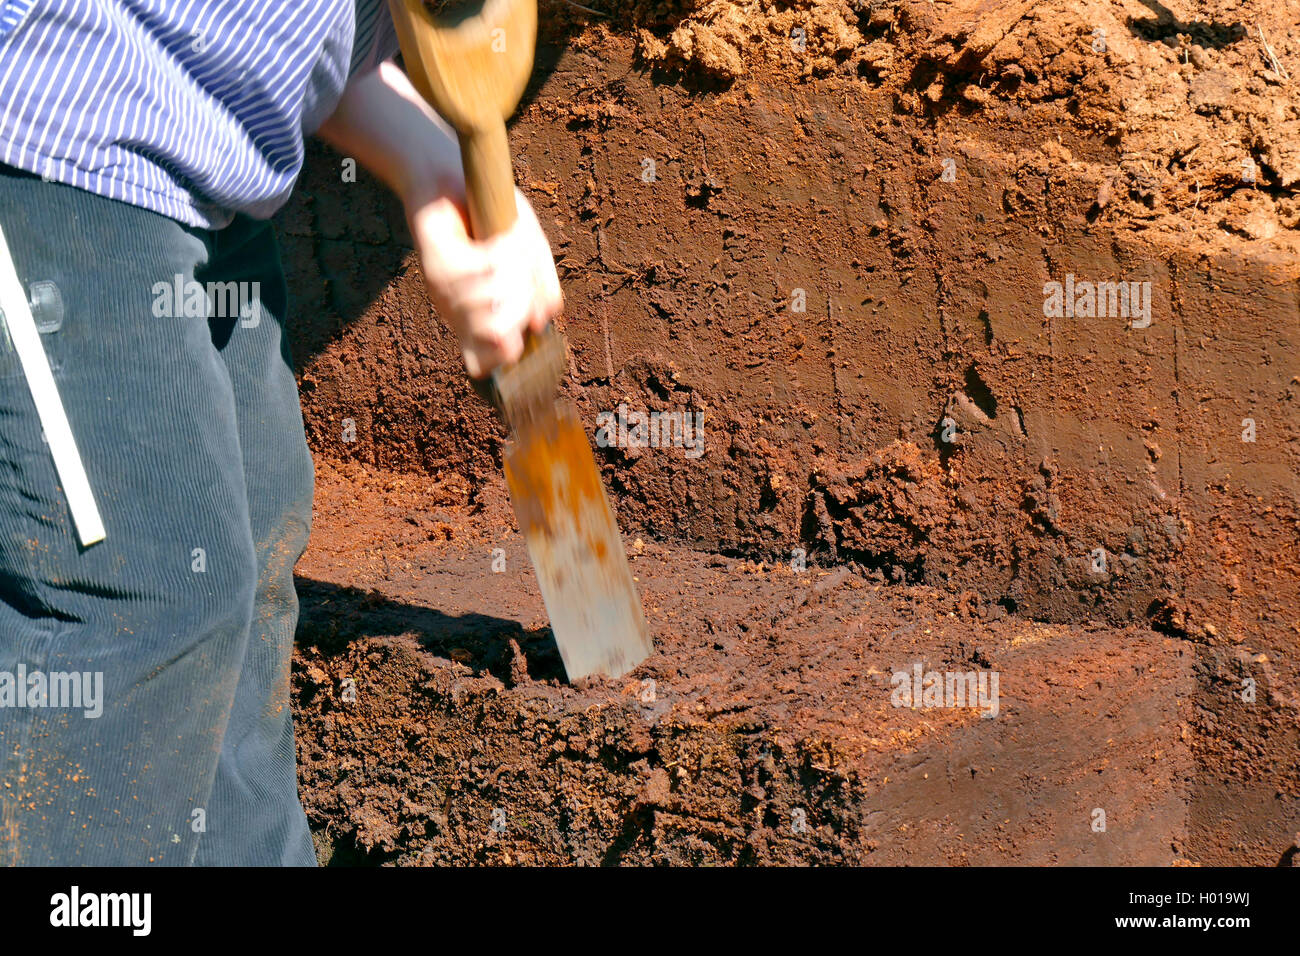 working peat cutter, Germany, Lower Saxony Stock Photo